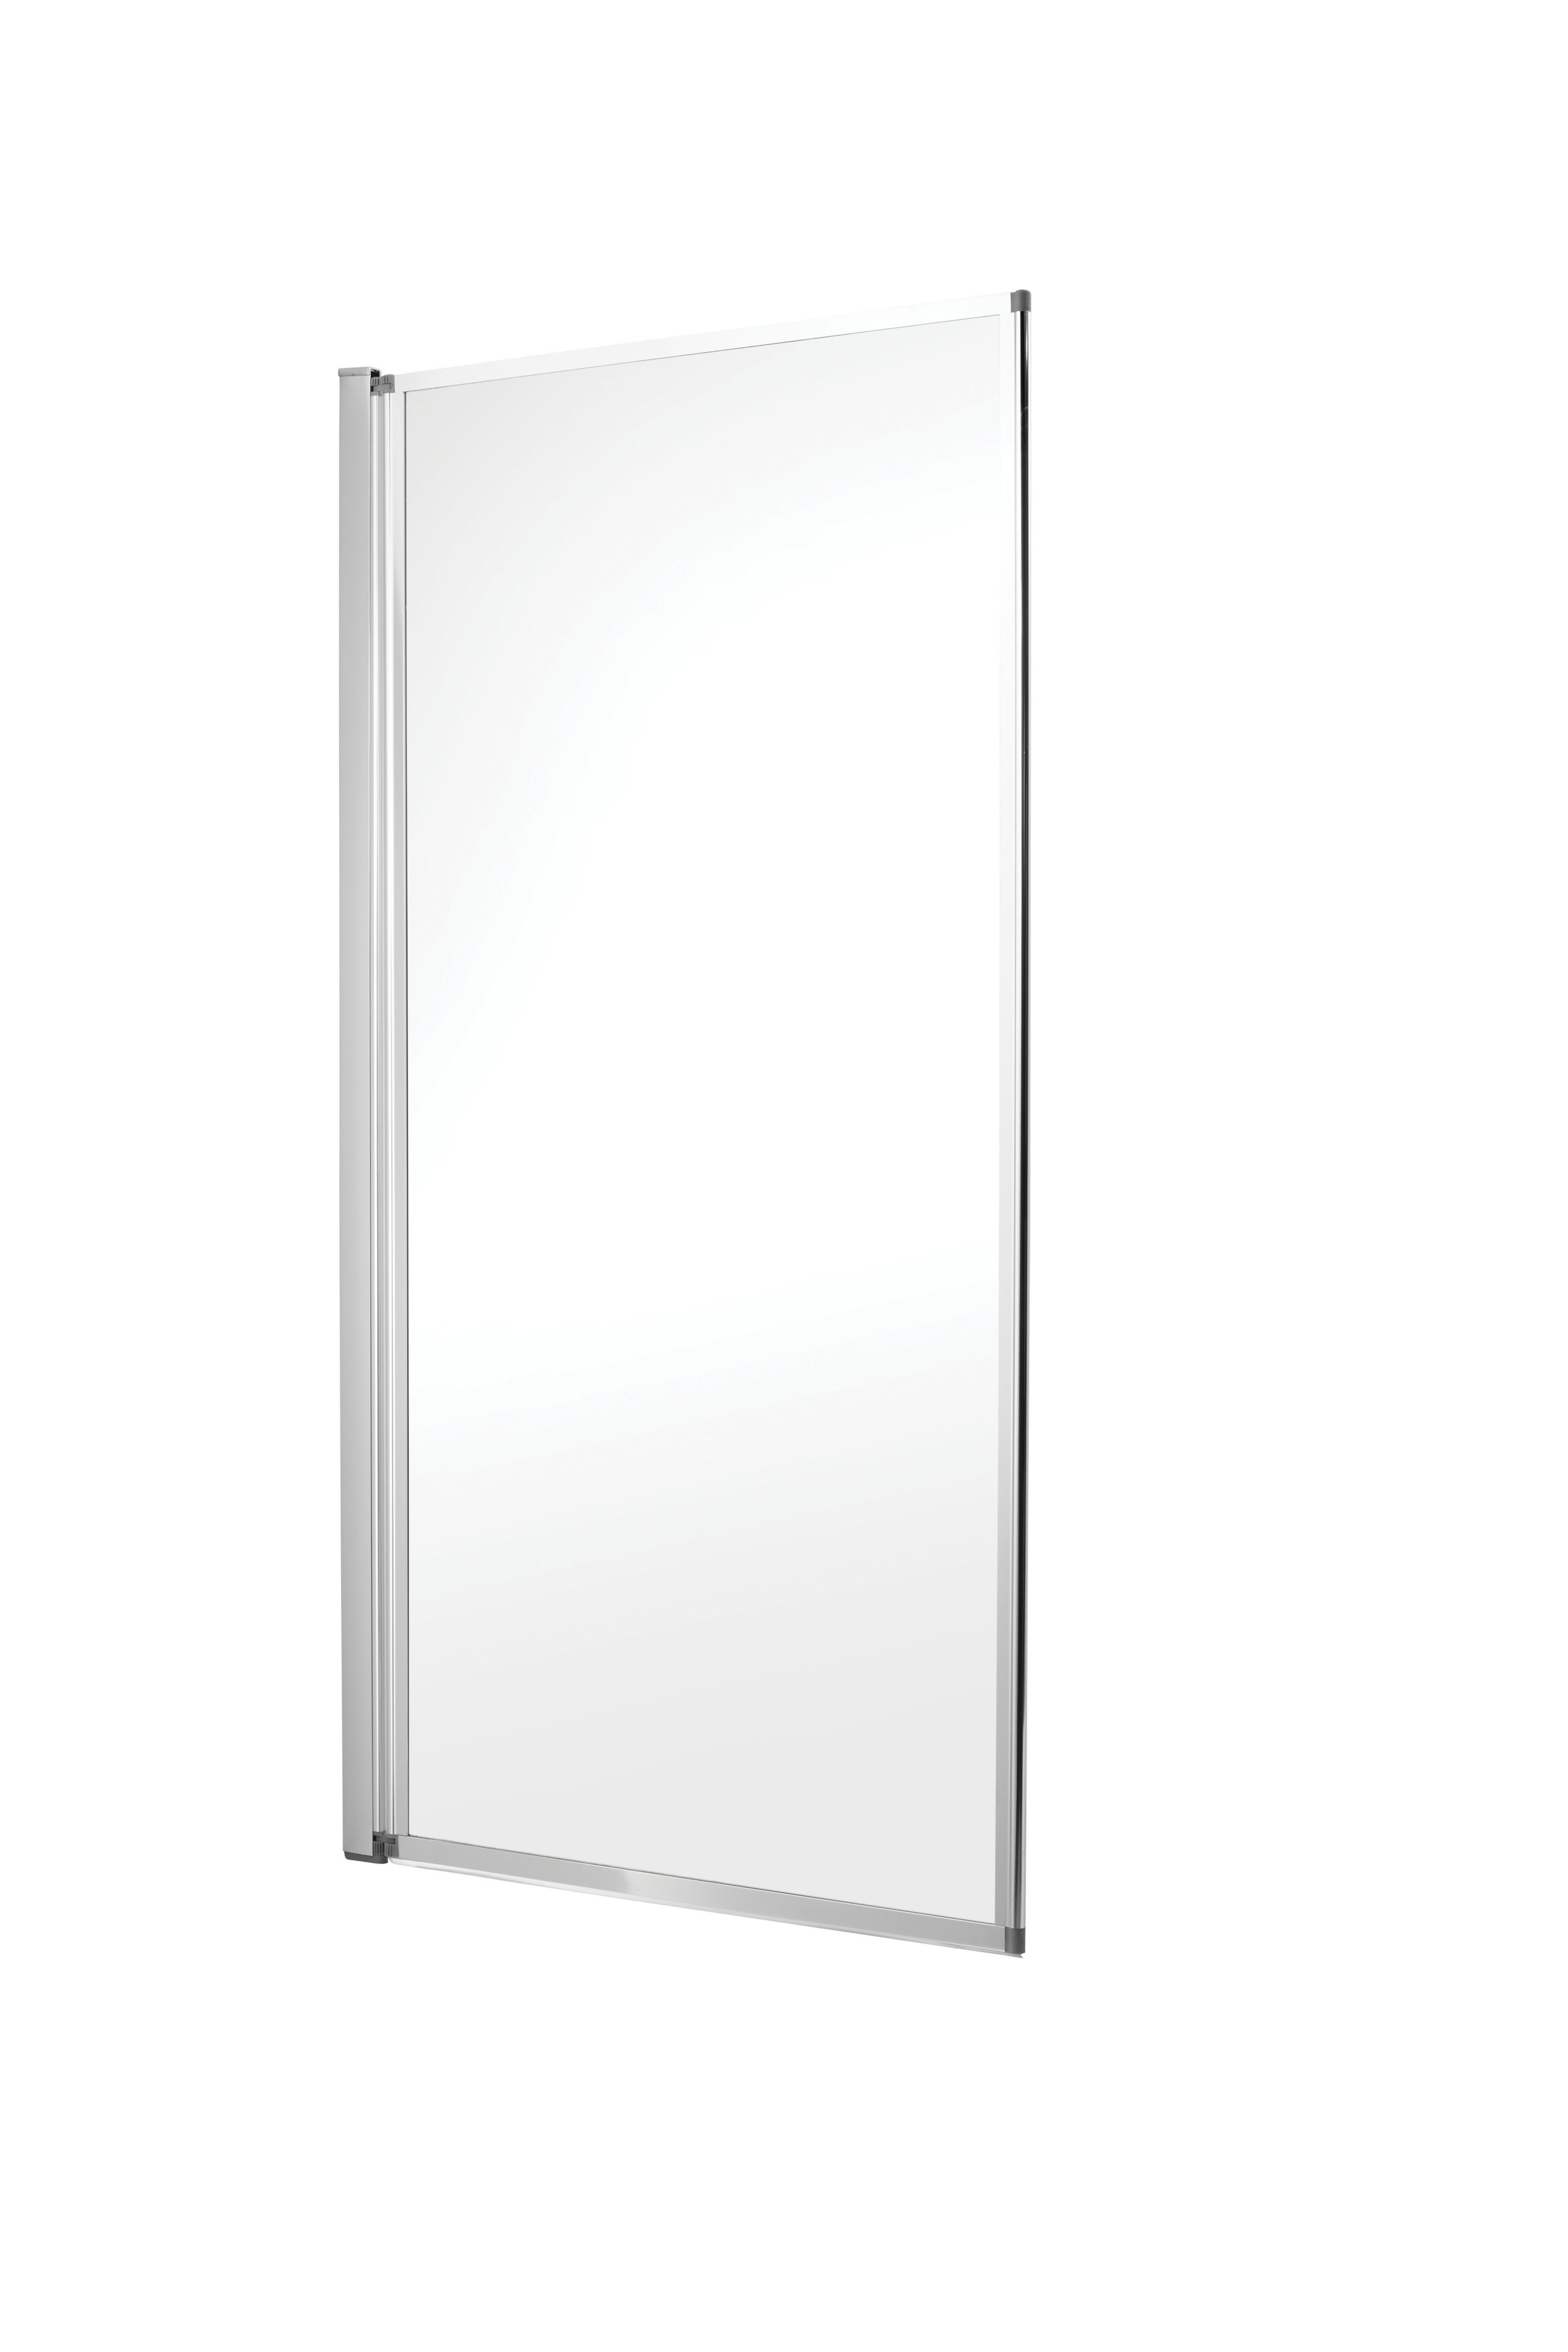 Image of Wickes Chrome with Clear Glass Framed Bath Screen - 1400 x 750mm